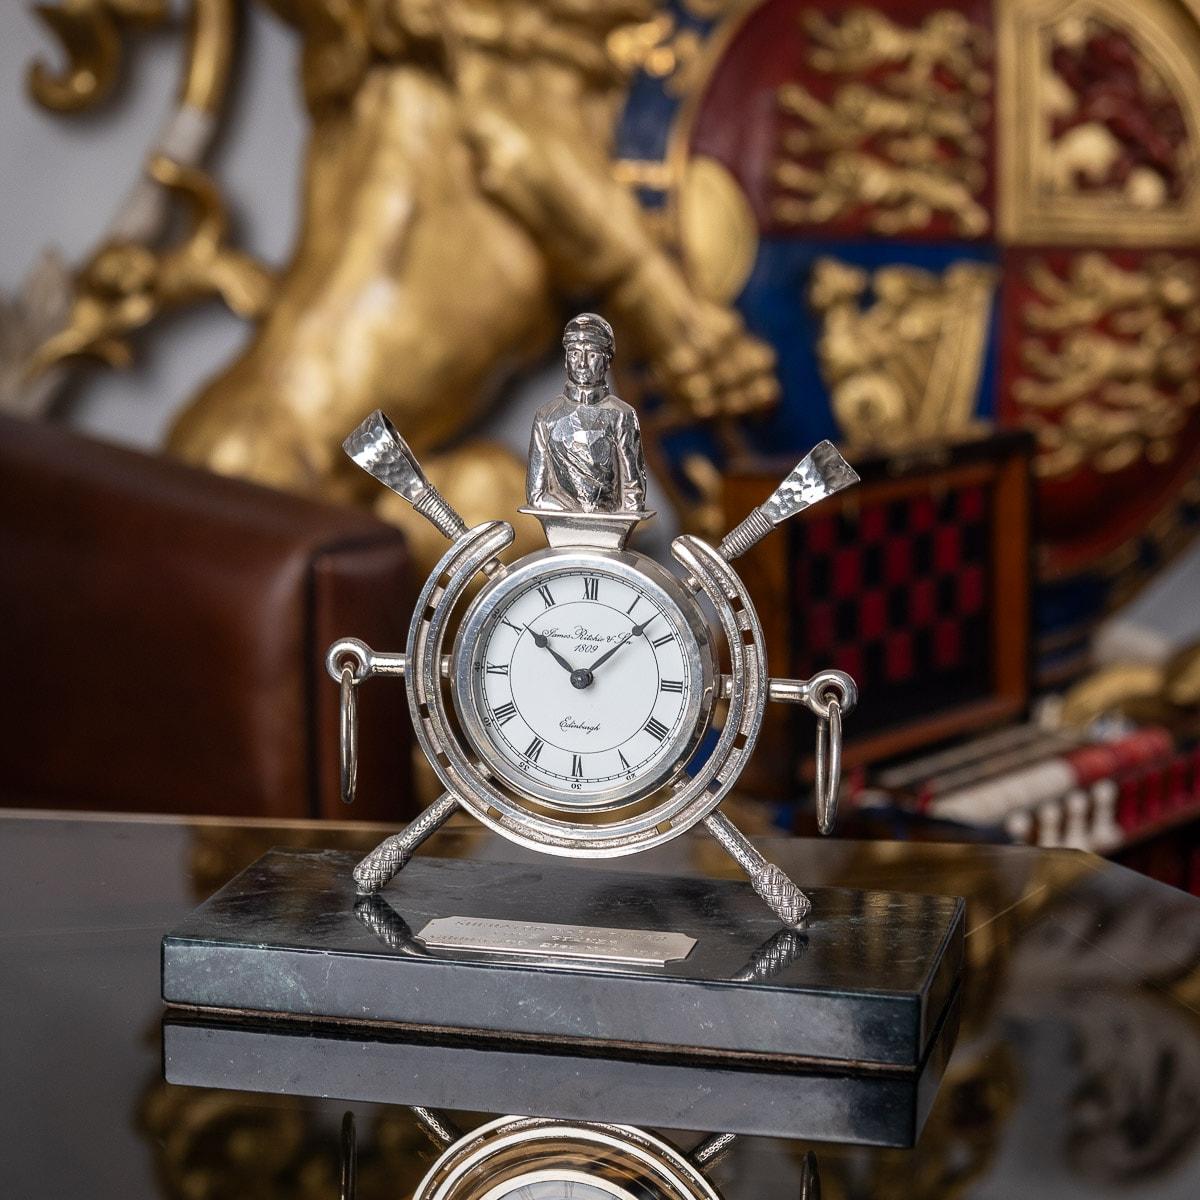 Unusual 20th century solid silver clock on green marble base, the clock set between a horse-shoe and mounted with a jockey, stirrups and riding crops. The clock is in fully working order and base engraved 'Sheraton Park Tower, Lupe Stakes, Goodwood,